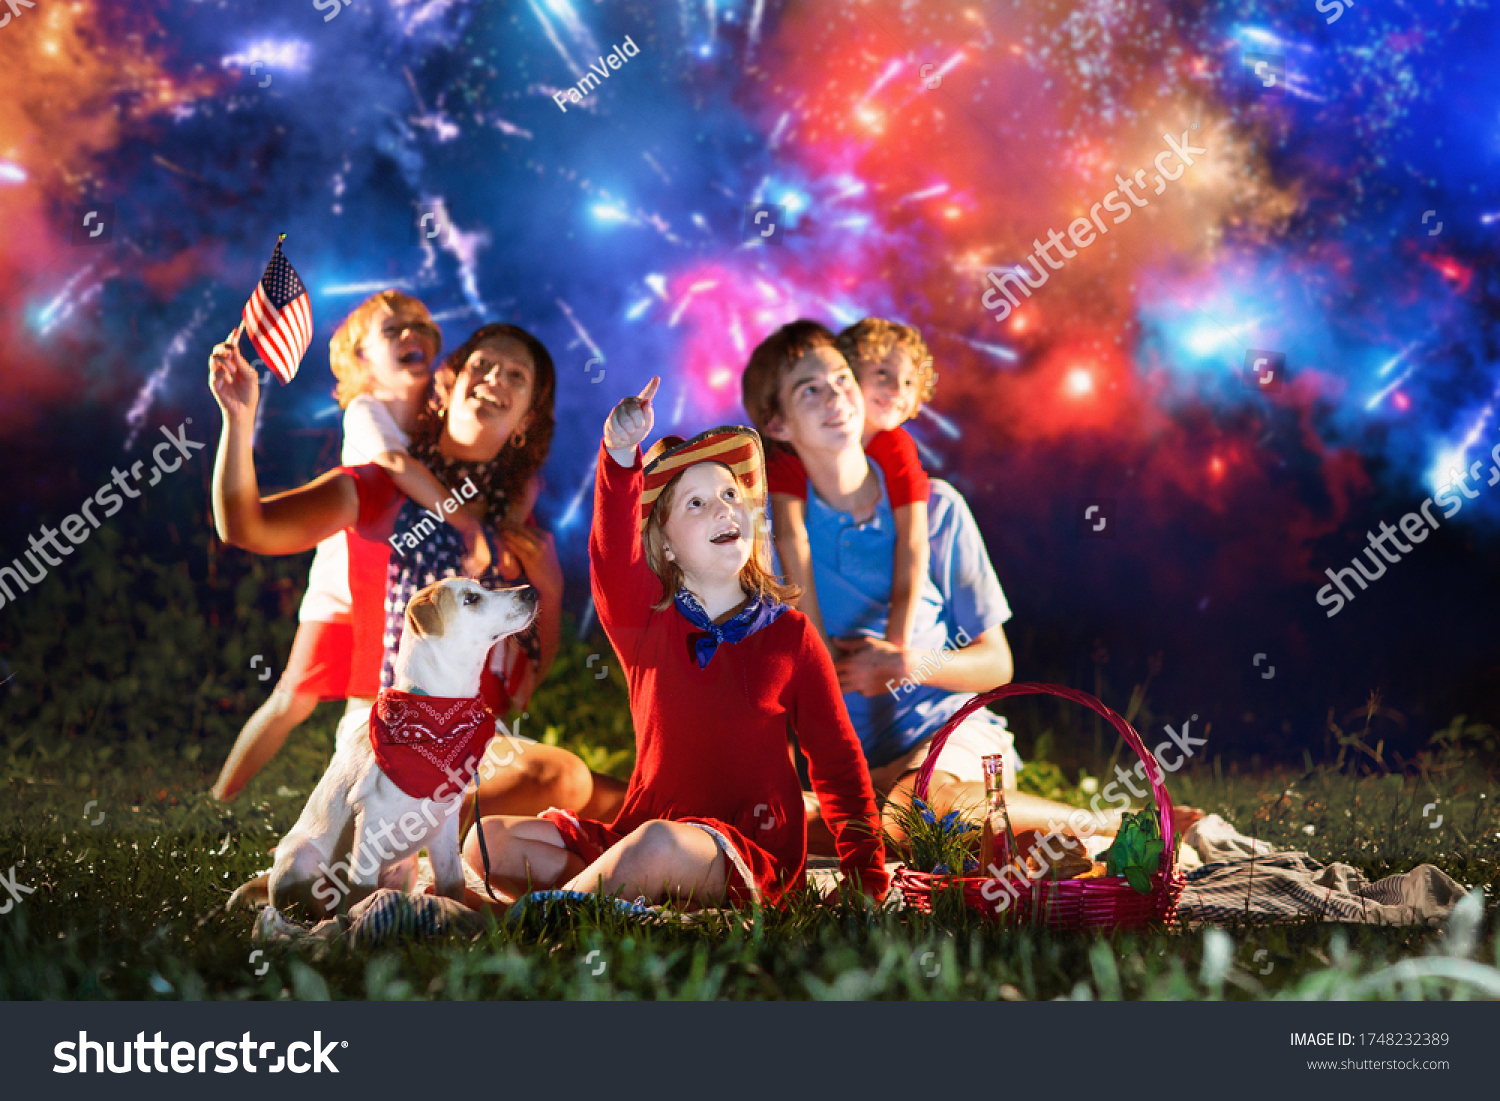 American Family Celebrating Independence Day Picnic Foto stock 1748232389  Shutterstock